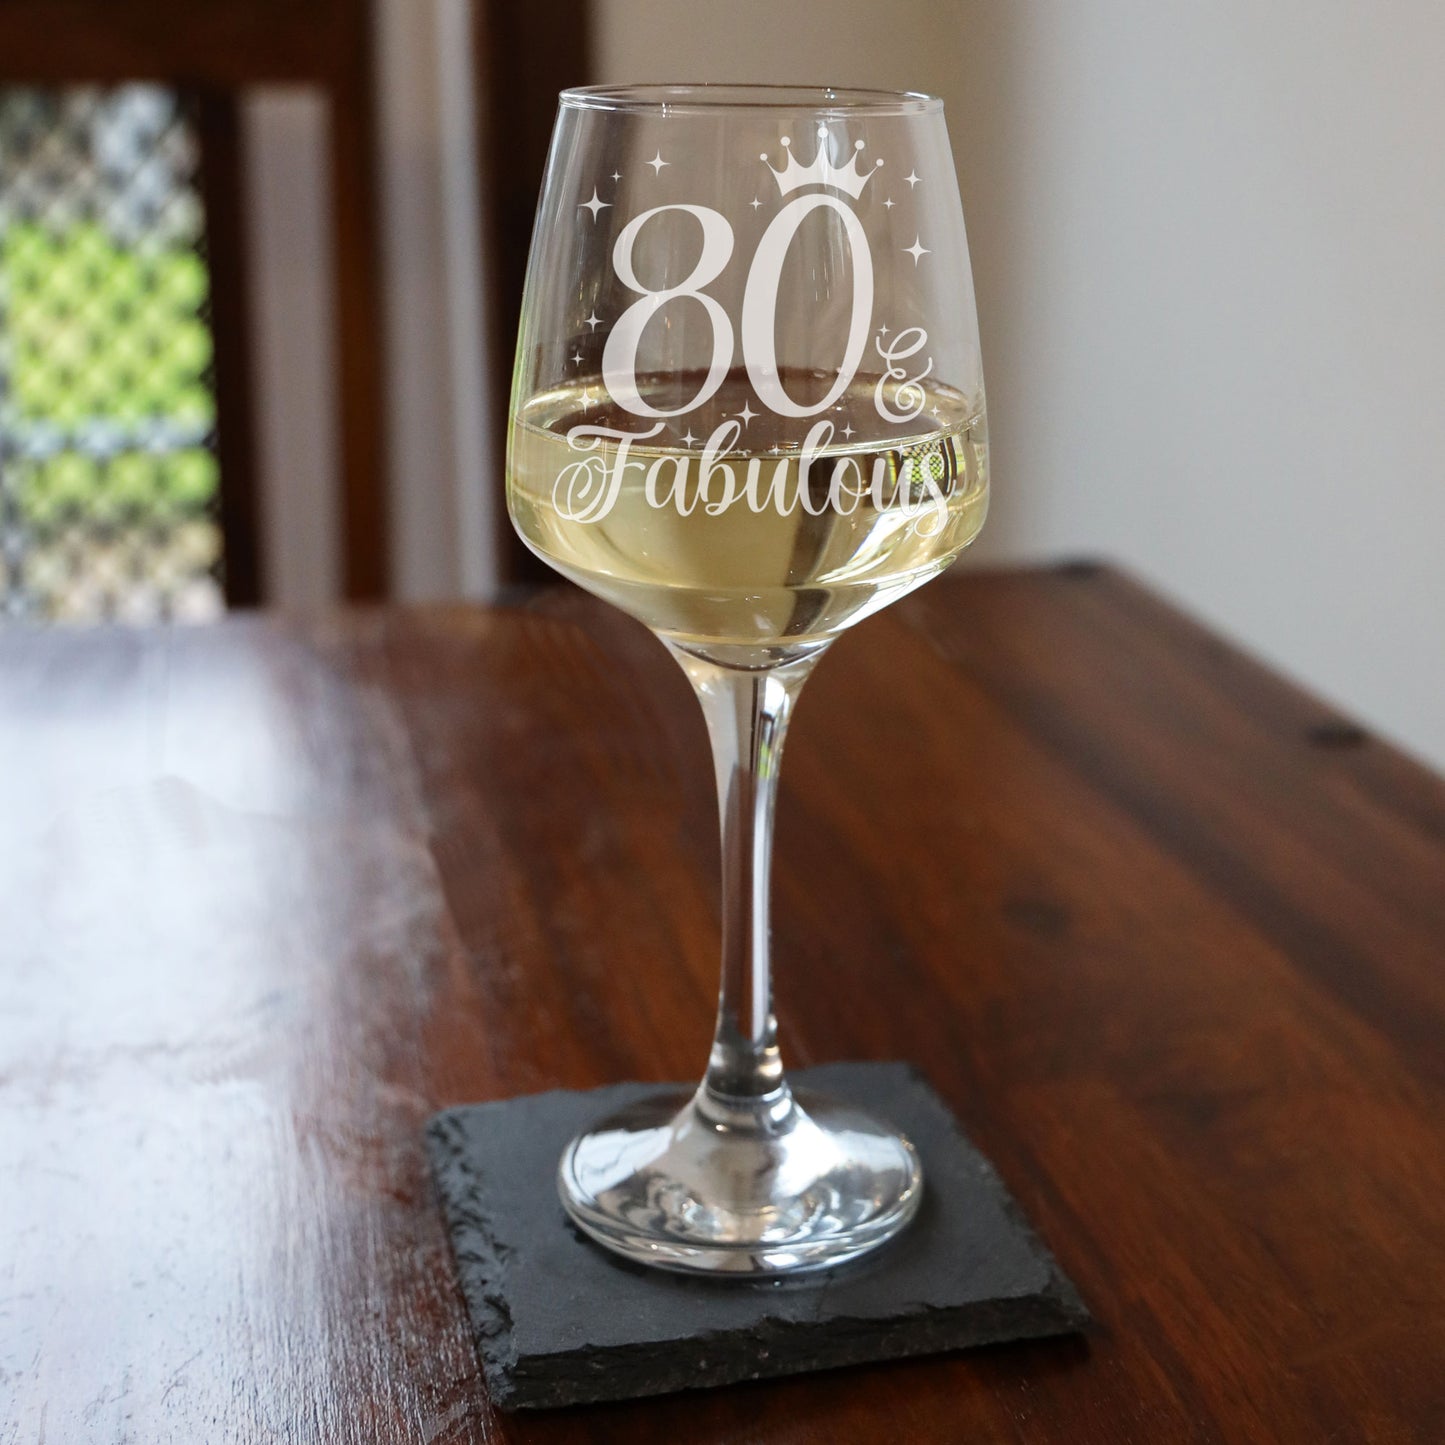 80 & Fabulous 80th Birthday Gift Engraved Wine Glass and/or Coaster Set  - Always Looking Good - Wine Glass Only  